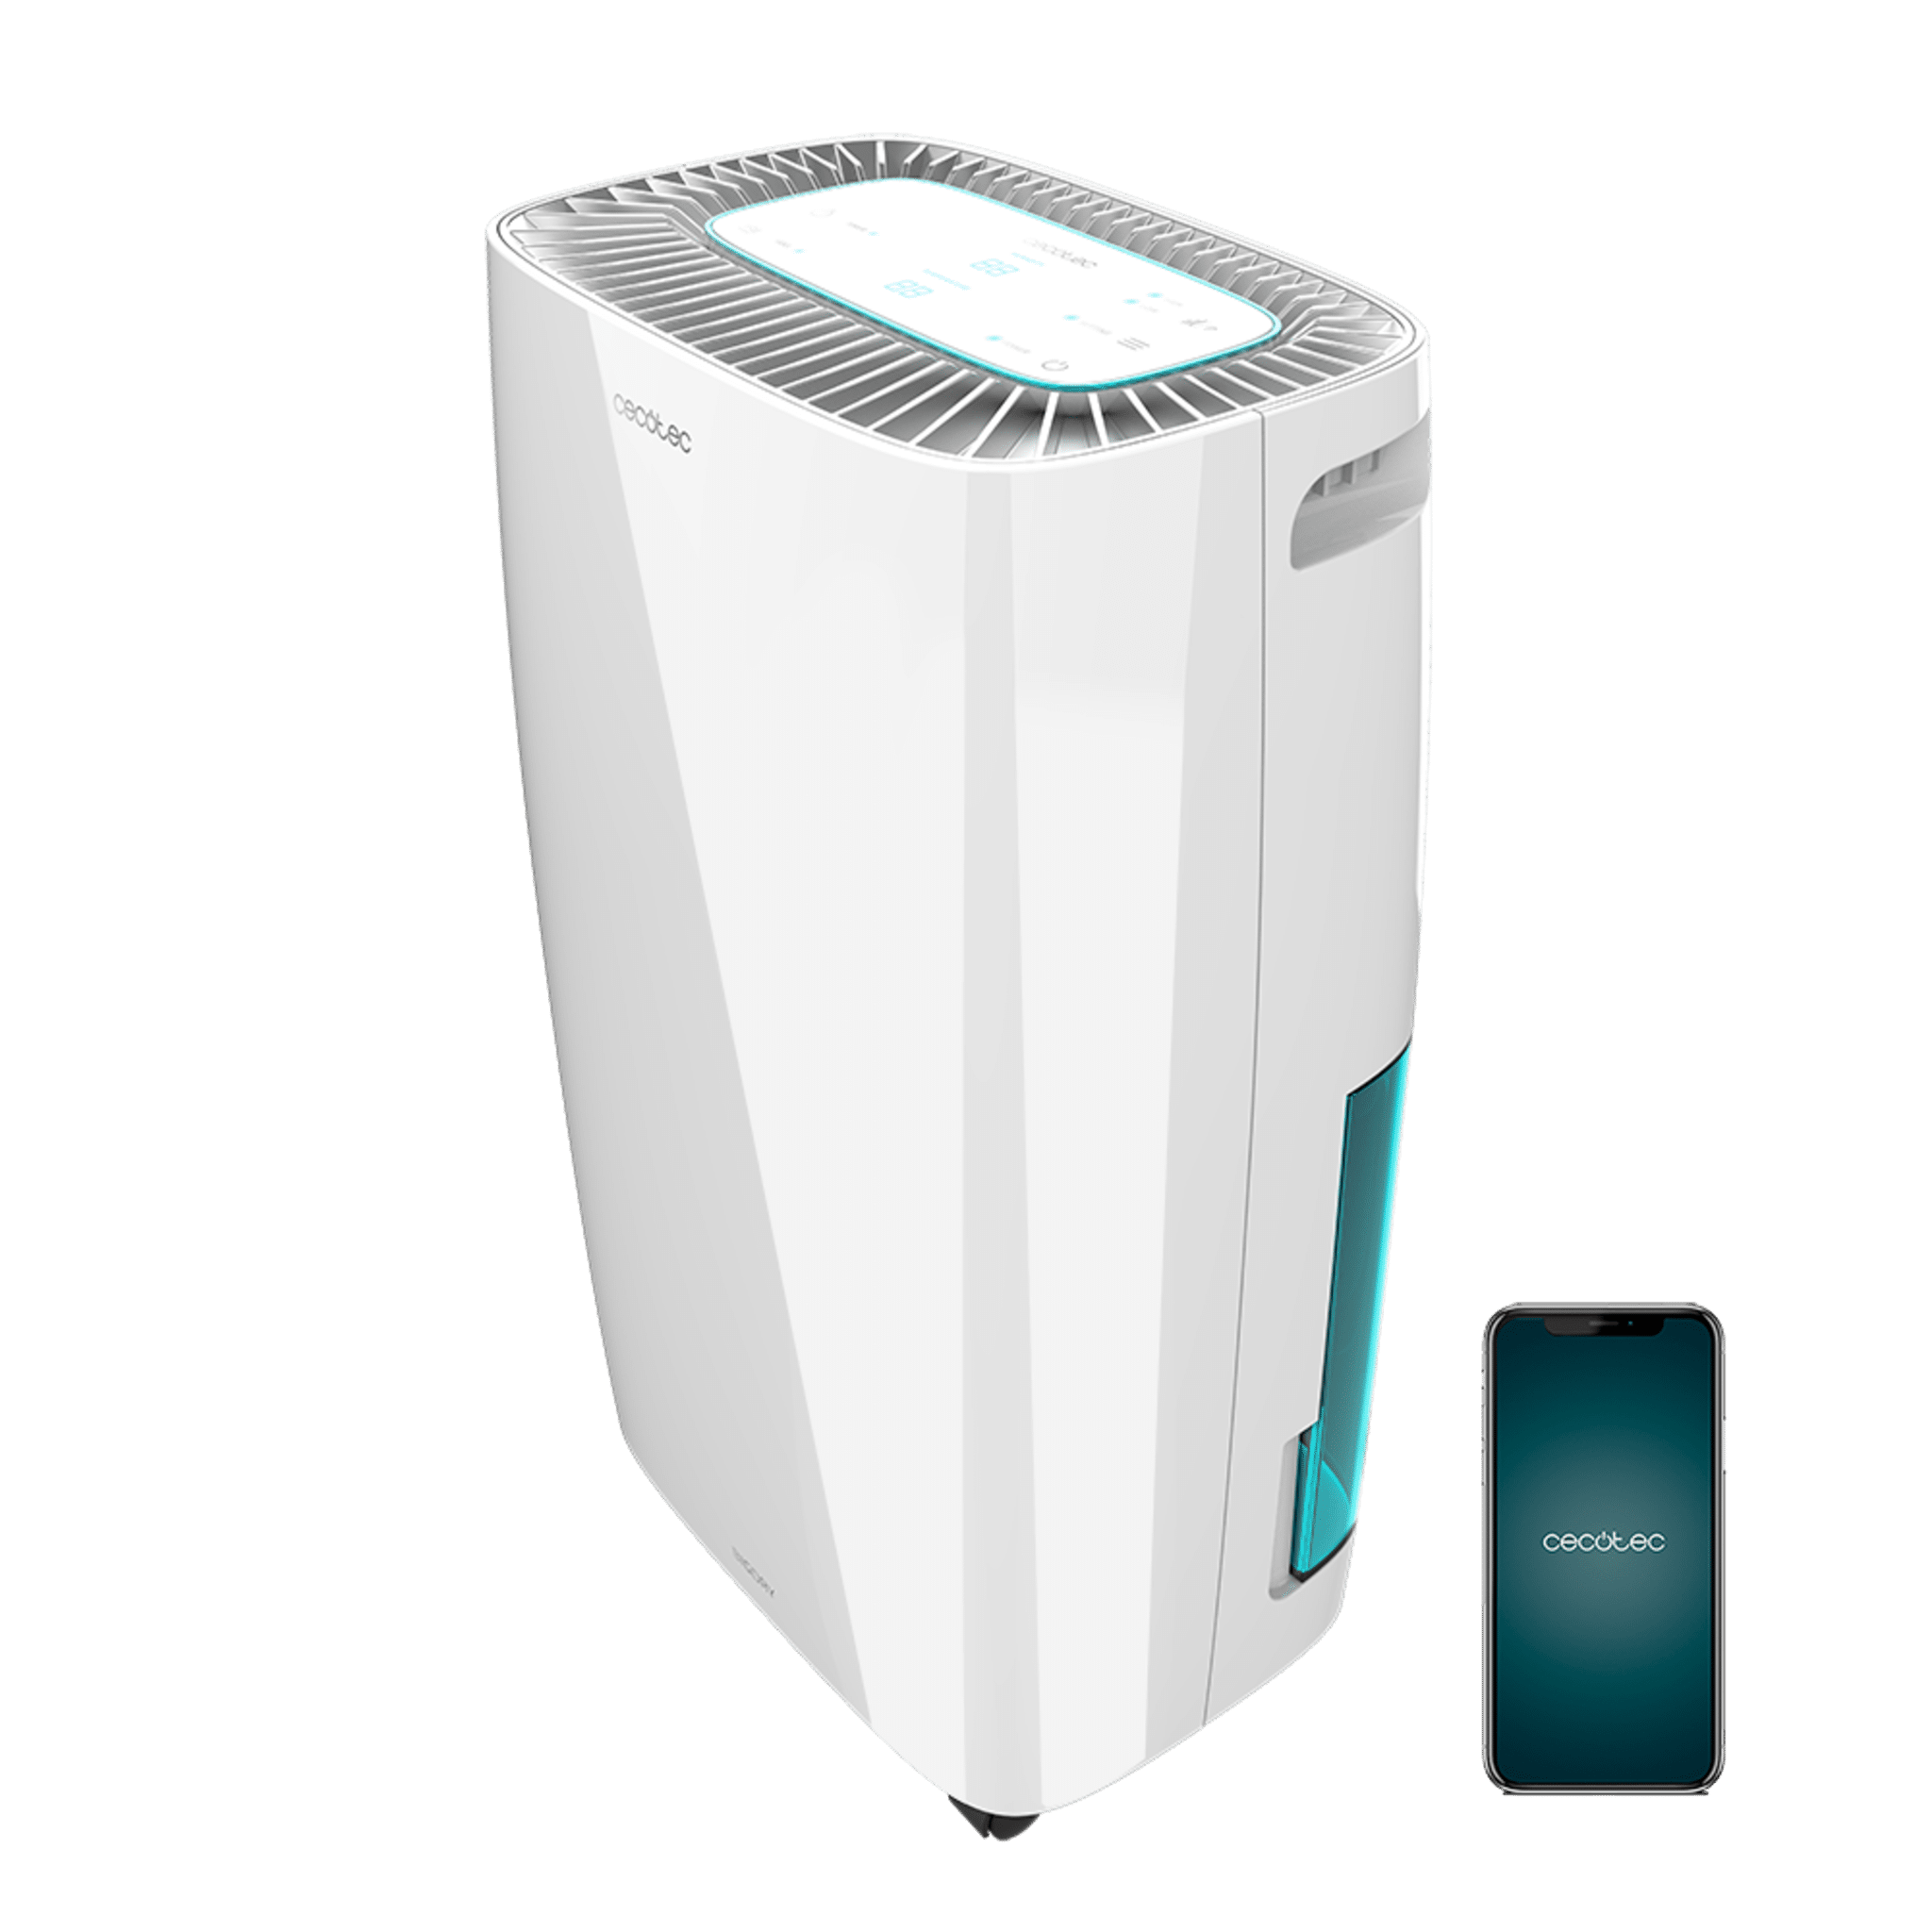 WATERTANK AZUL - CONGA 1090 EXCELSIOR/SERIE 1090